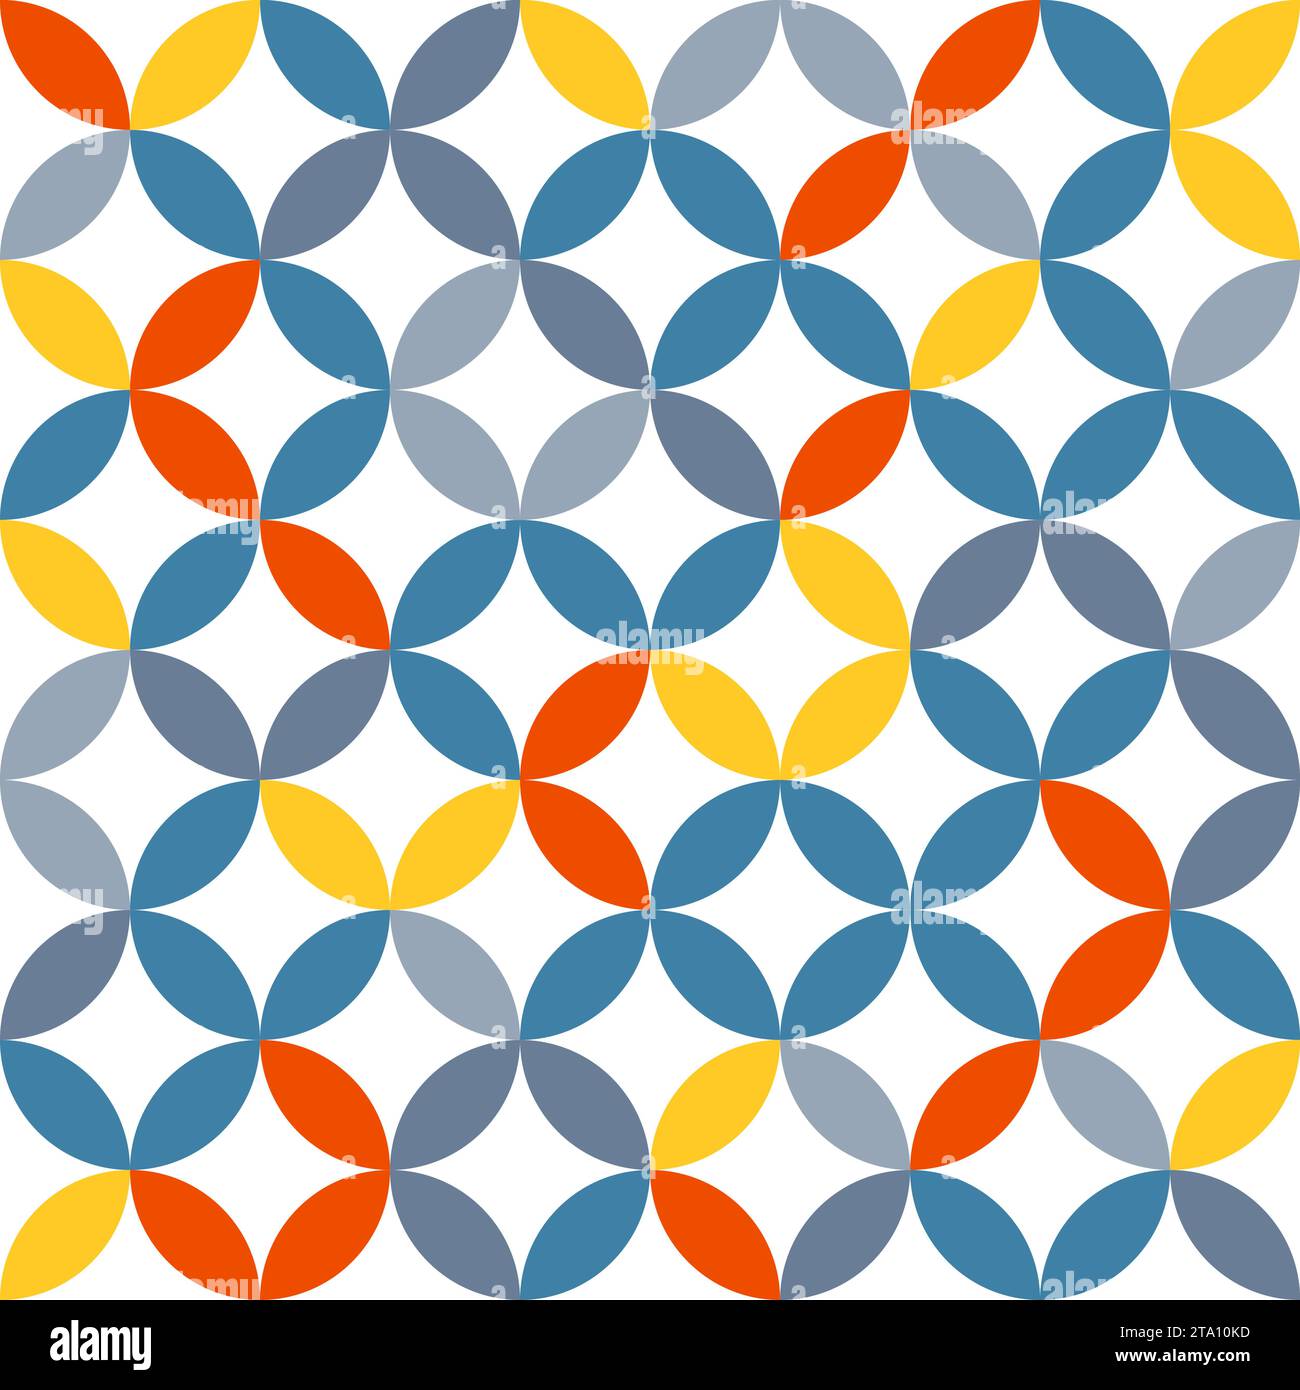 Colorful geometric pattern. Interconnecting circles and ovals abstract retro fashion texture. Seamless pattern. Stock Vector